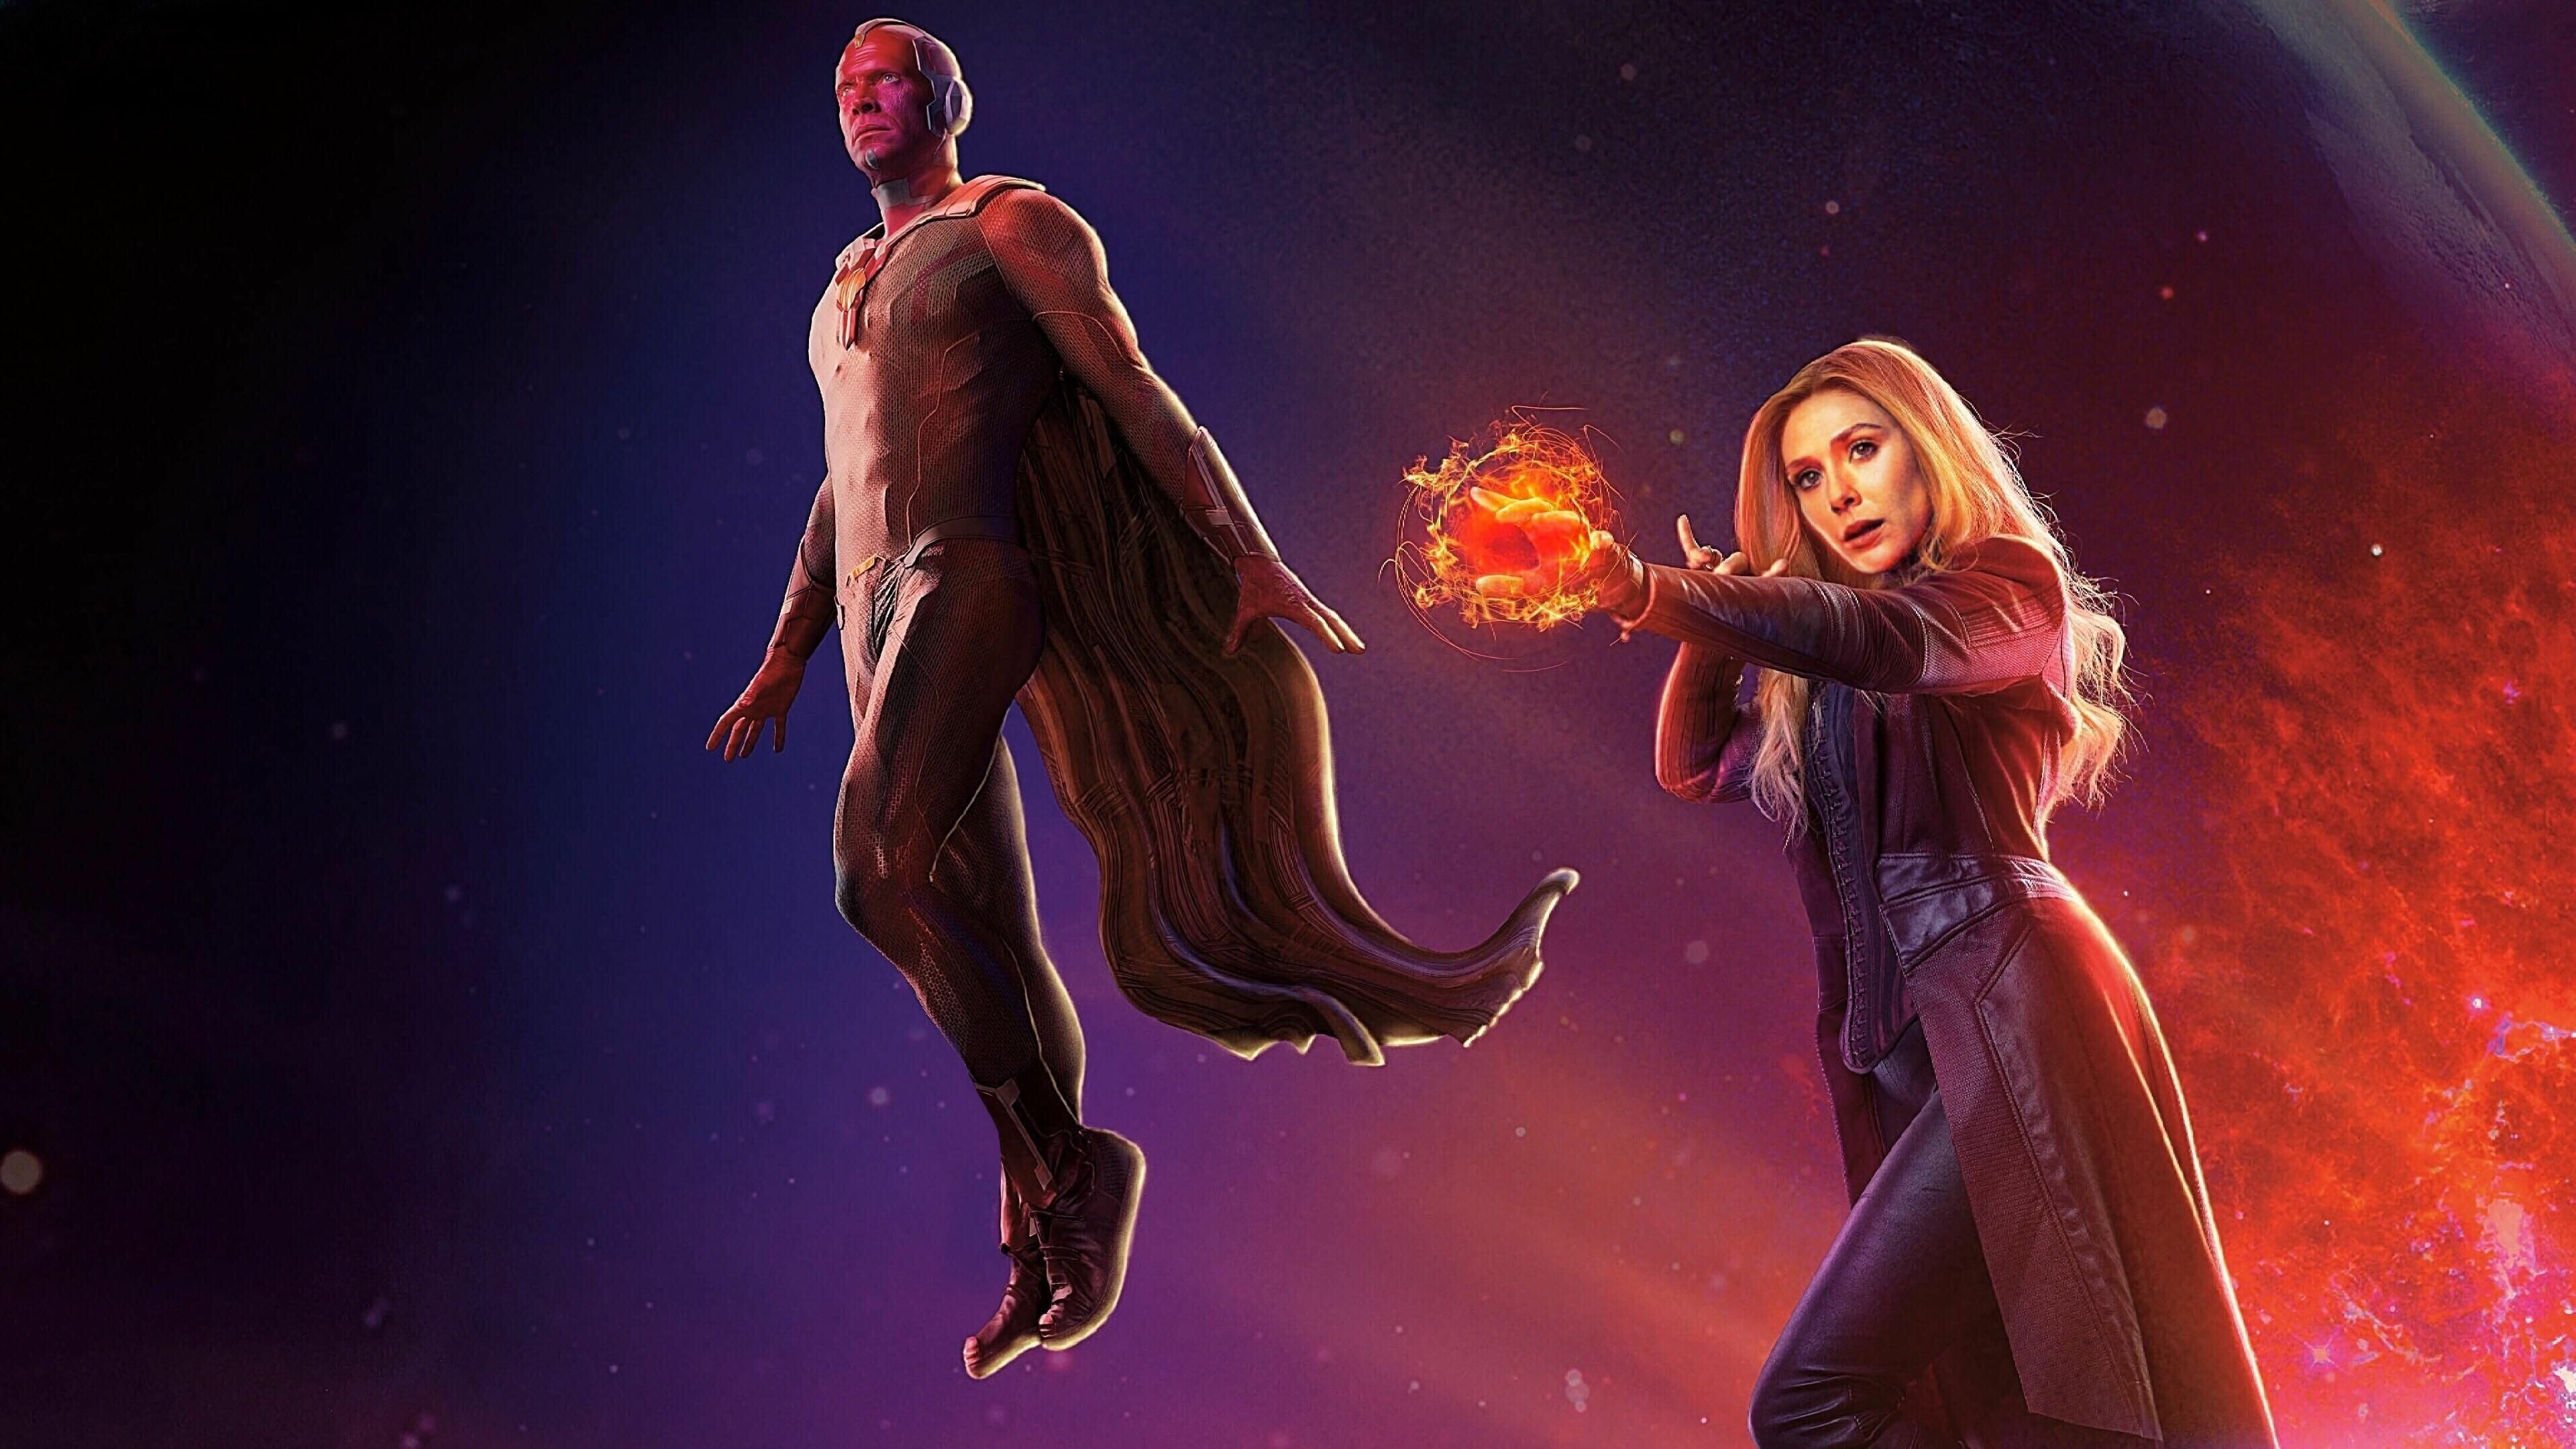 WandaVision: Elizabeth Olsen and Paul Bettany reprising their roles from the films. 3840x2160 4K Wallpaper.